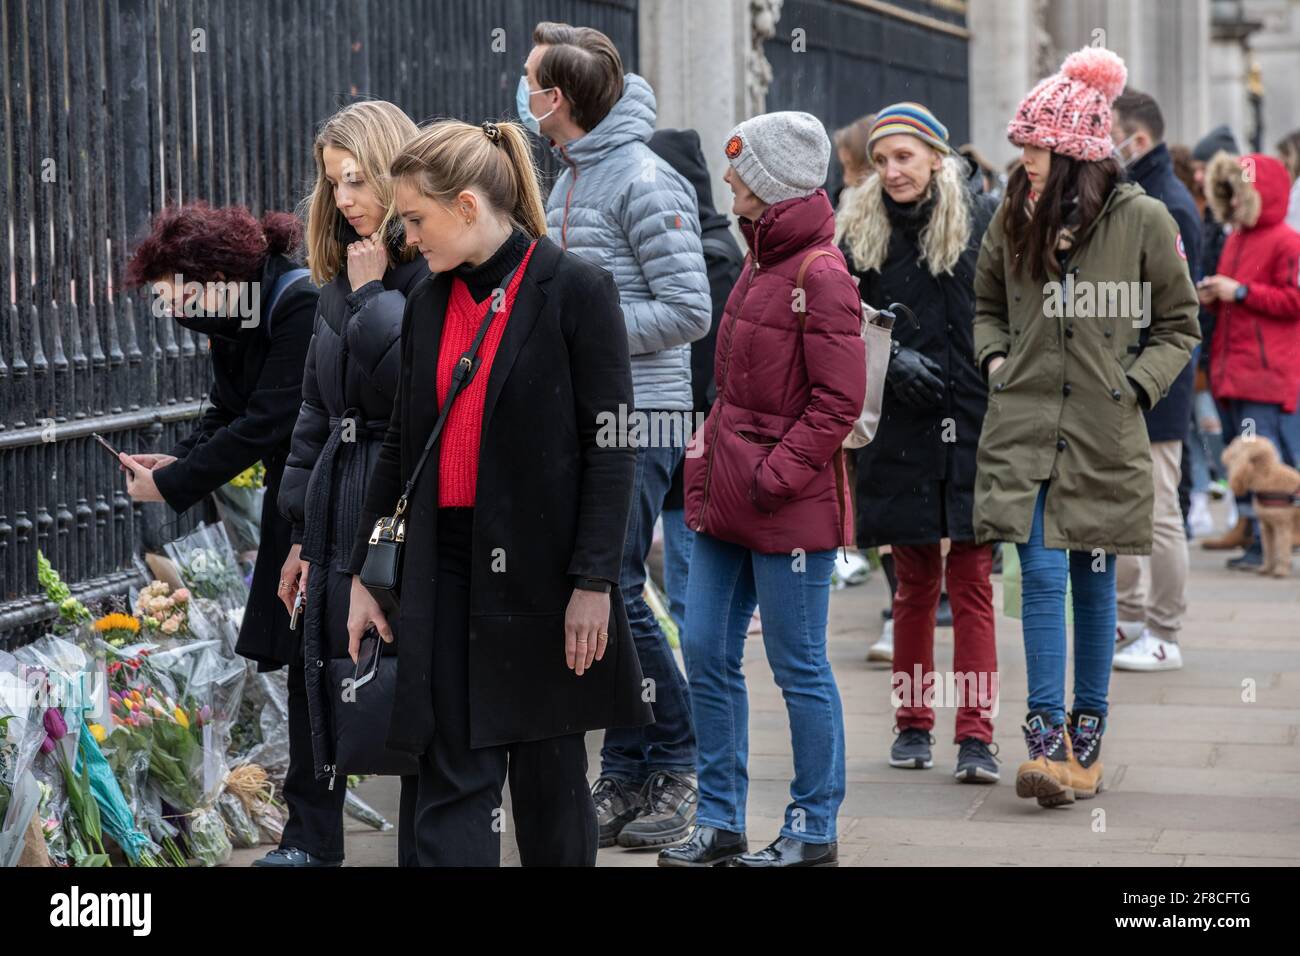 Well wishers queue to lay flowers to show their respects for Duke of Edinburgh outside Buckingham Palace after the Palace announced his death. Stock Photo